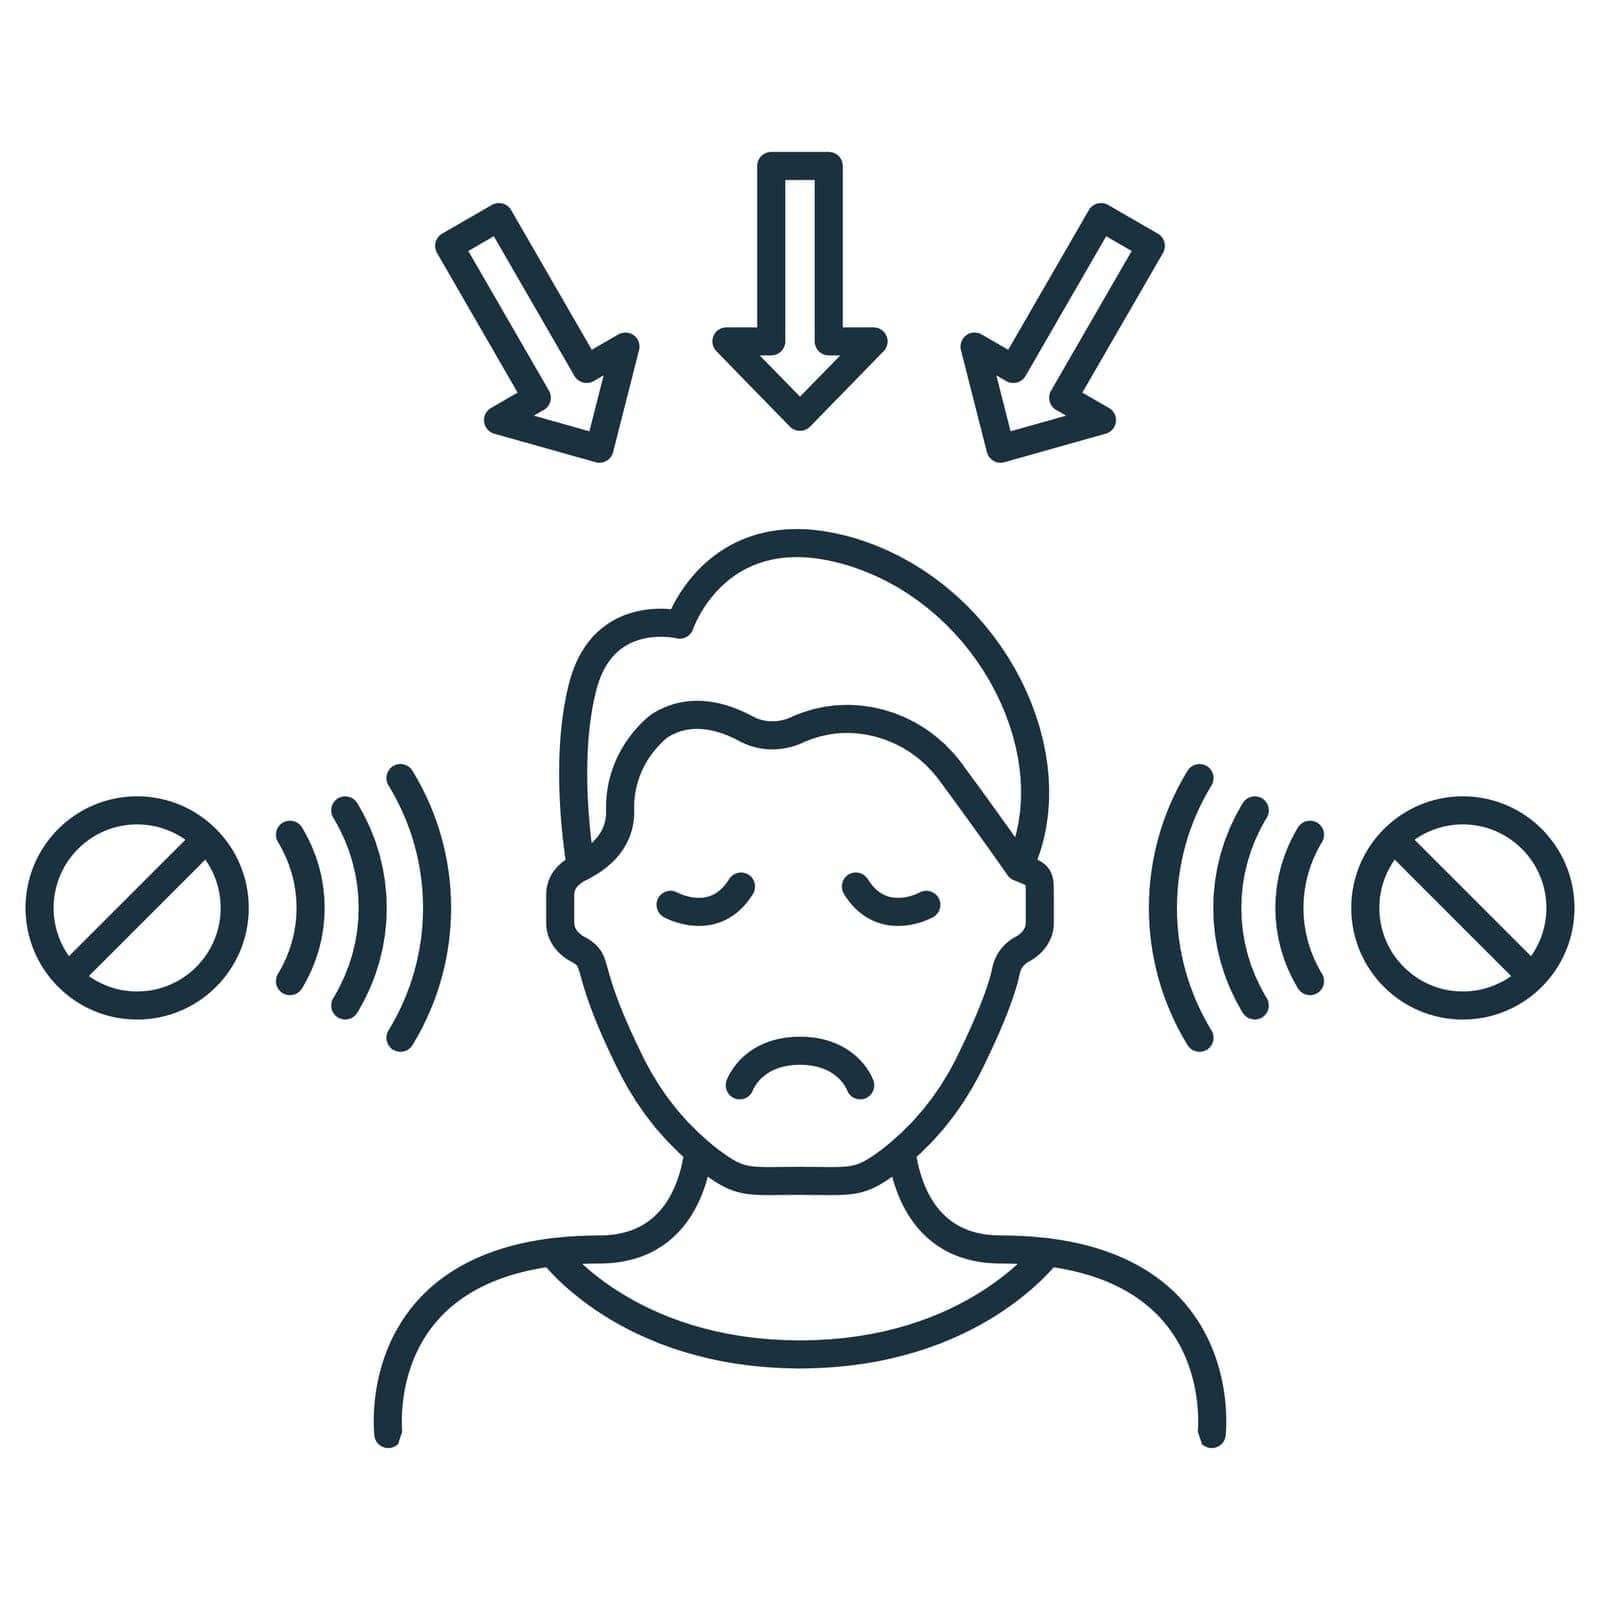 Social Bad Influence on Man Line Icon. Negative Impact from Media and Internet Linear Pictogram. Depressed, Upset Man under Bad Influence Outline Icon. Editable Stroke. Isolated Vector Illustration.